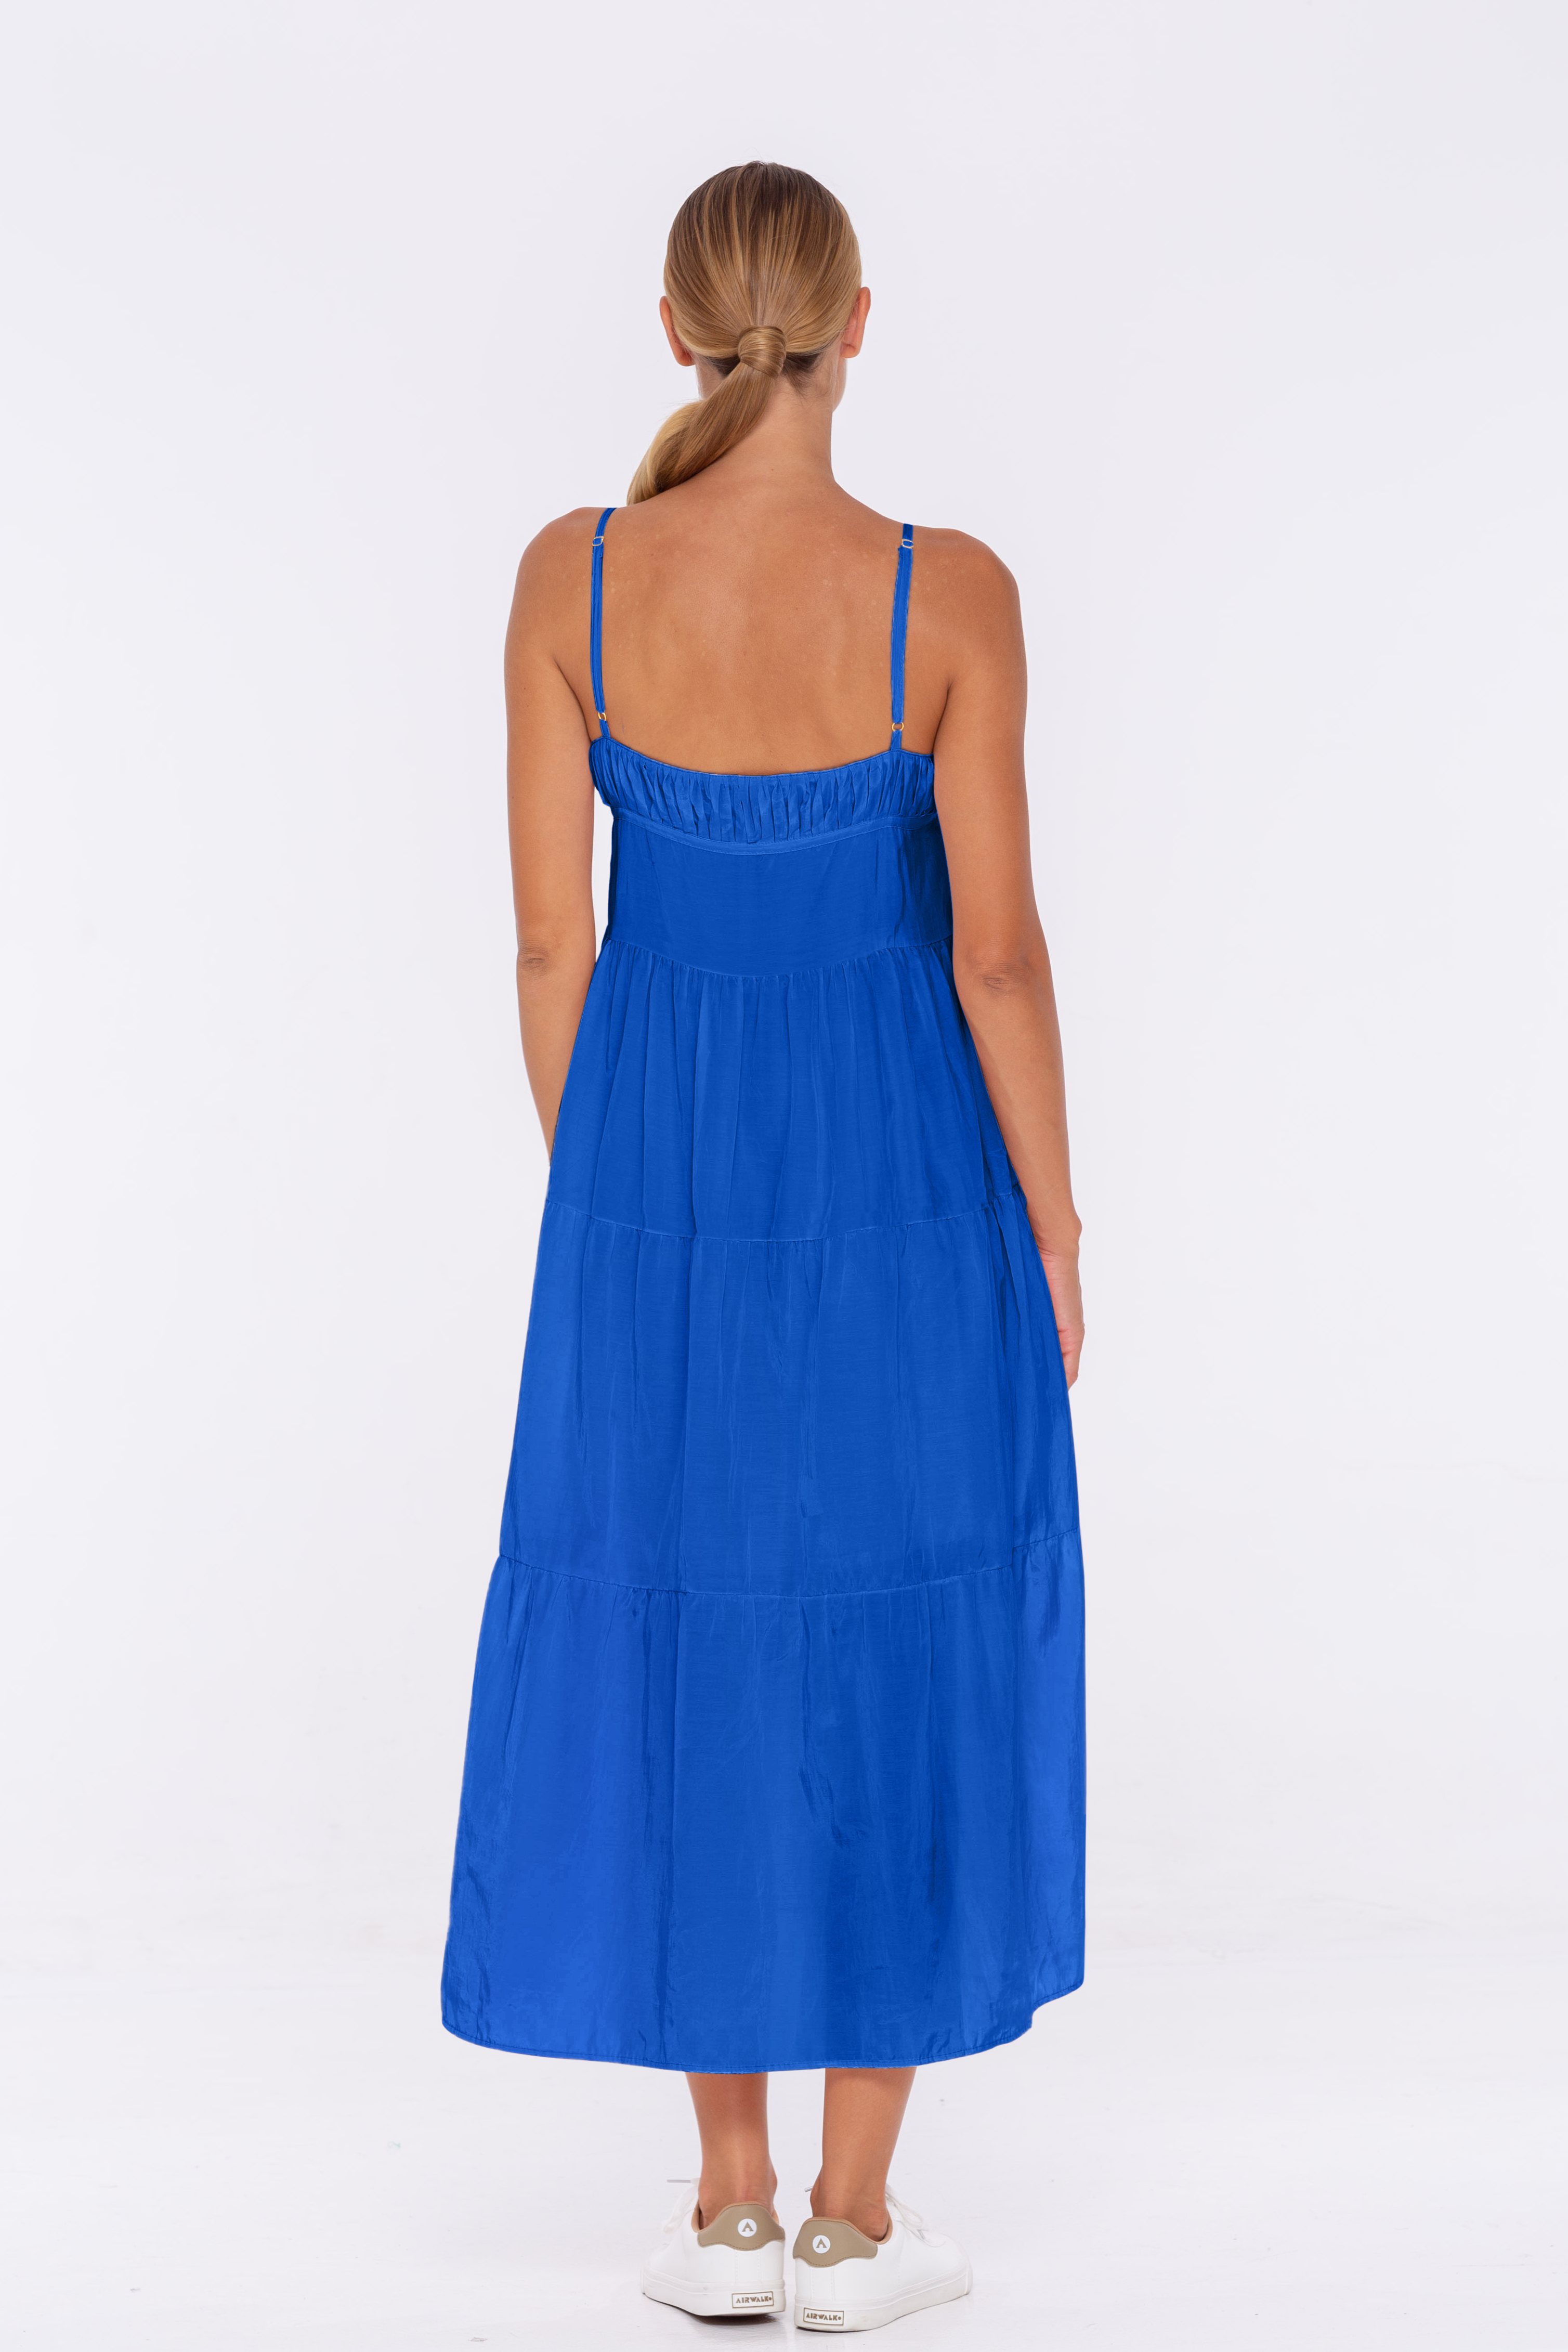 Fly To You Dress - Cobalt